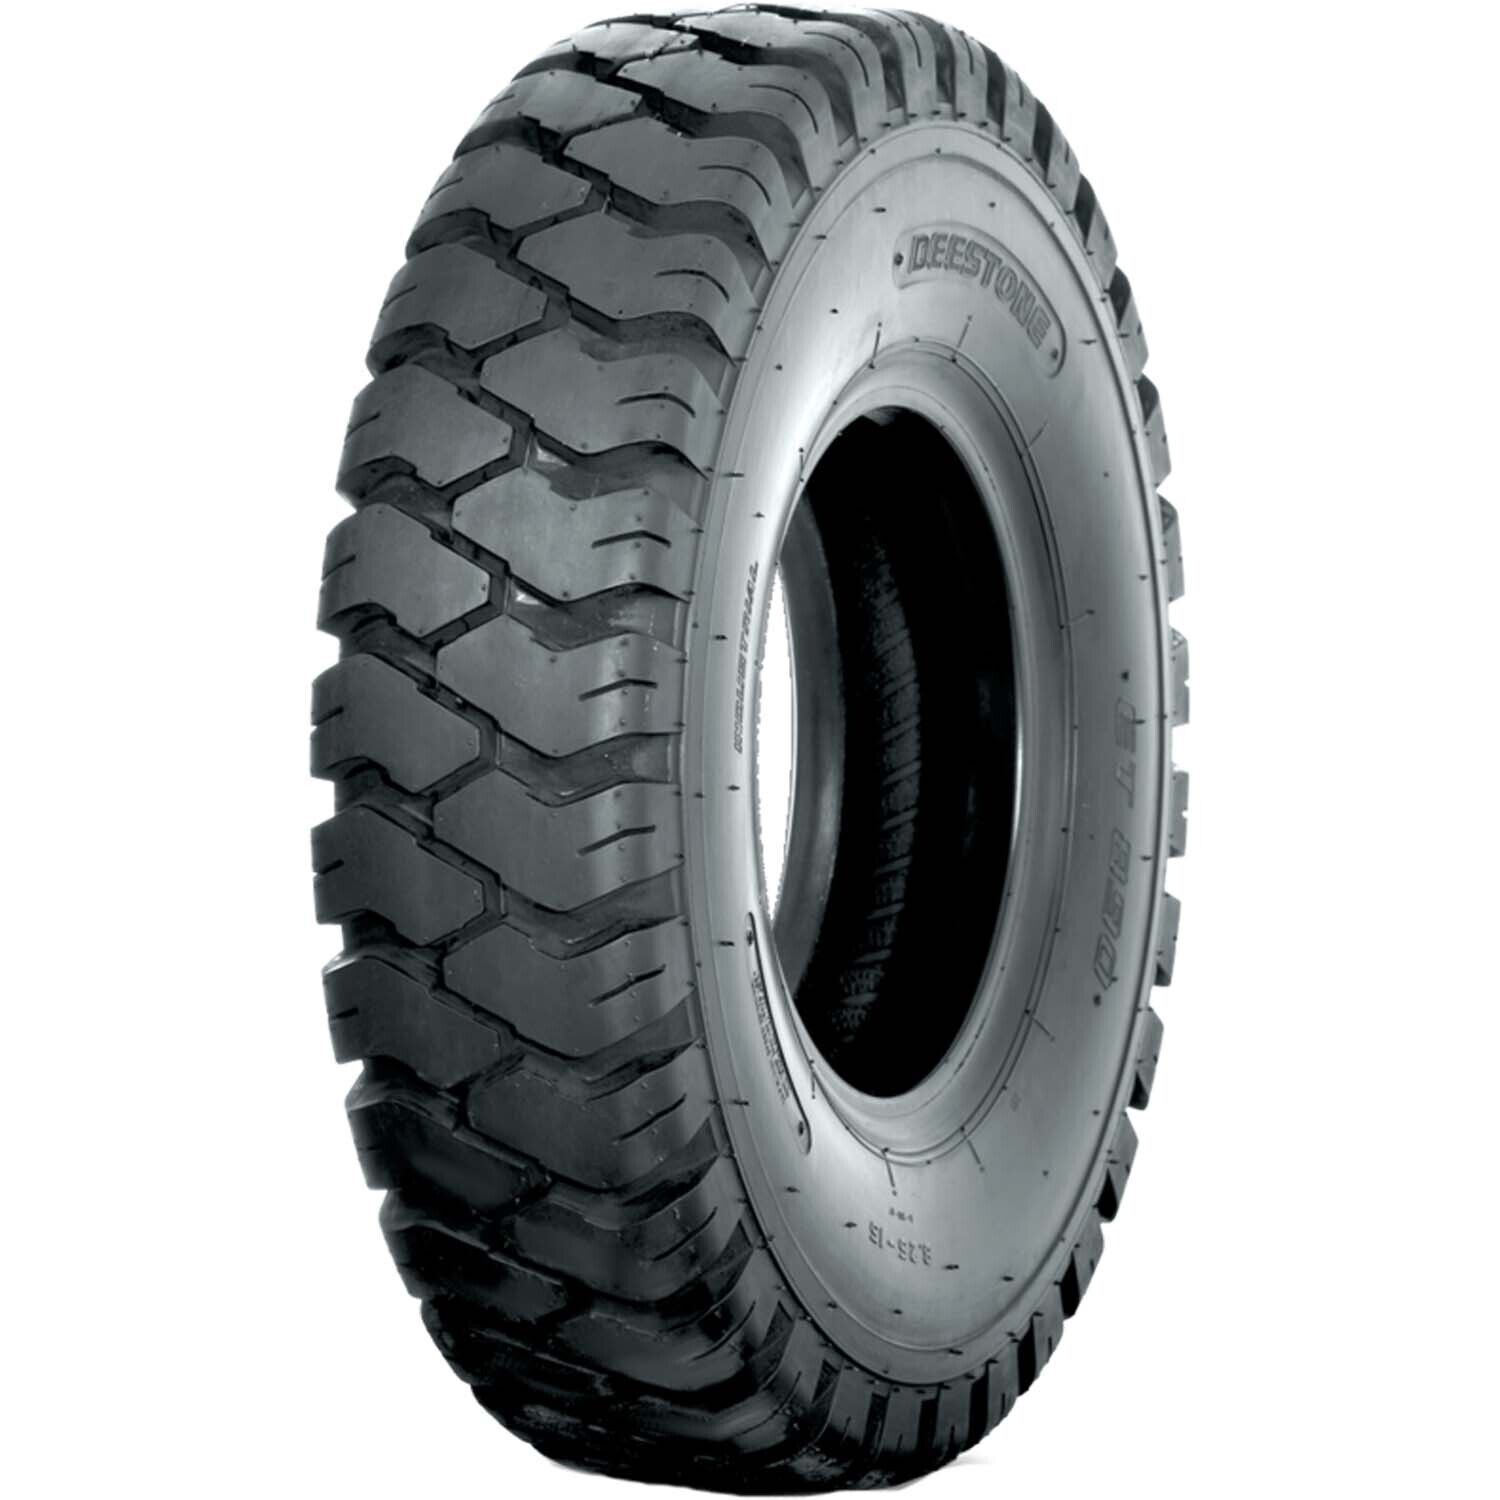 Deestone D301 Forklift Tire With Flap 12ply 7.00-12